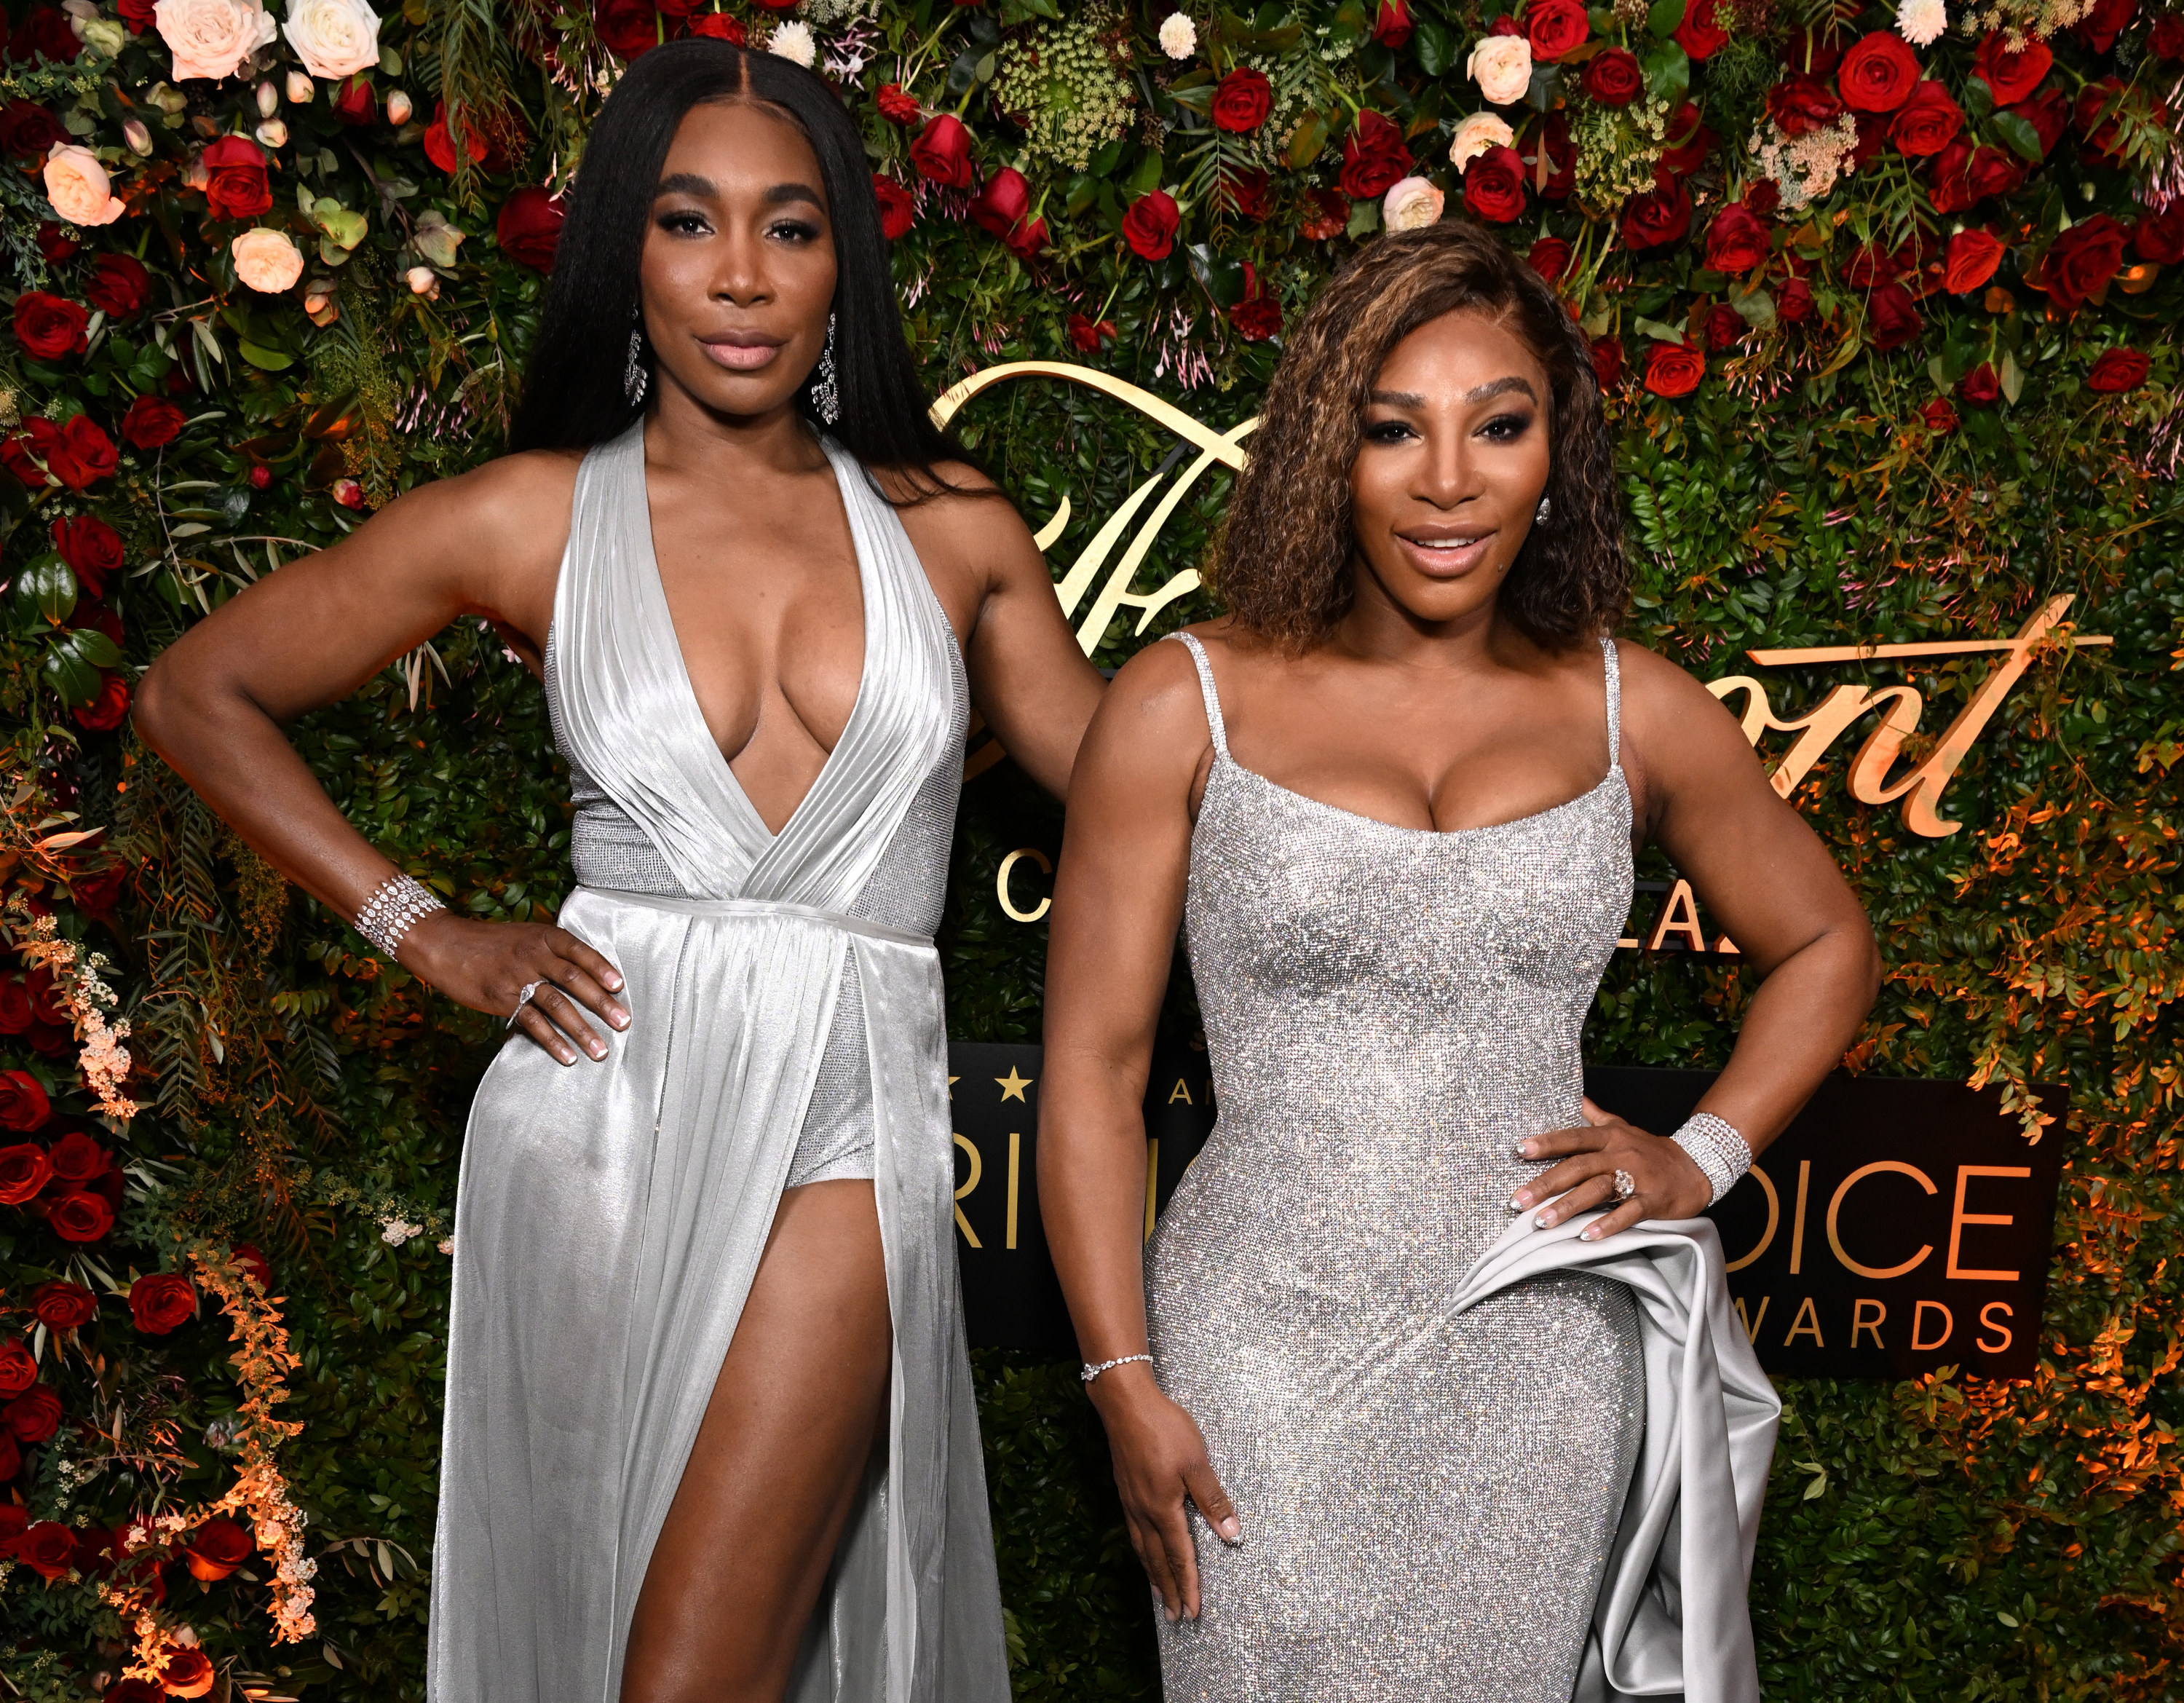 Venus and Serena Williams pose for a photo in front of roses